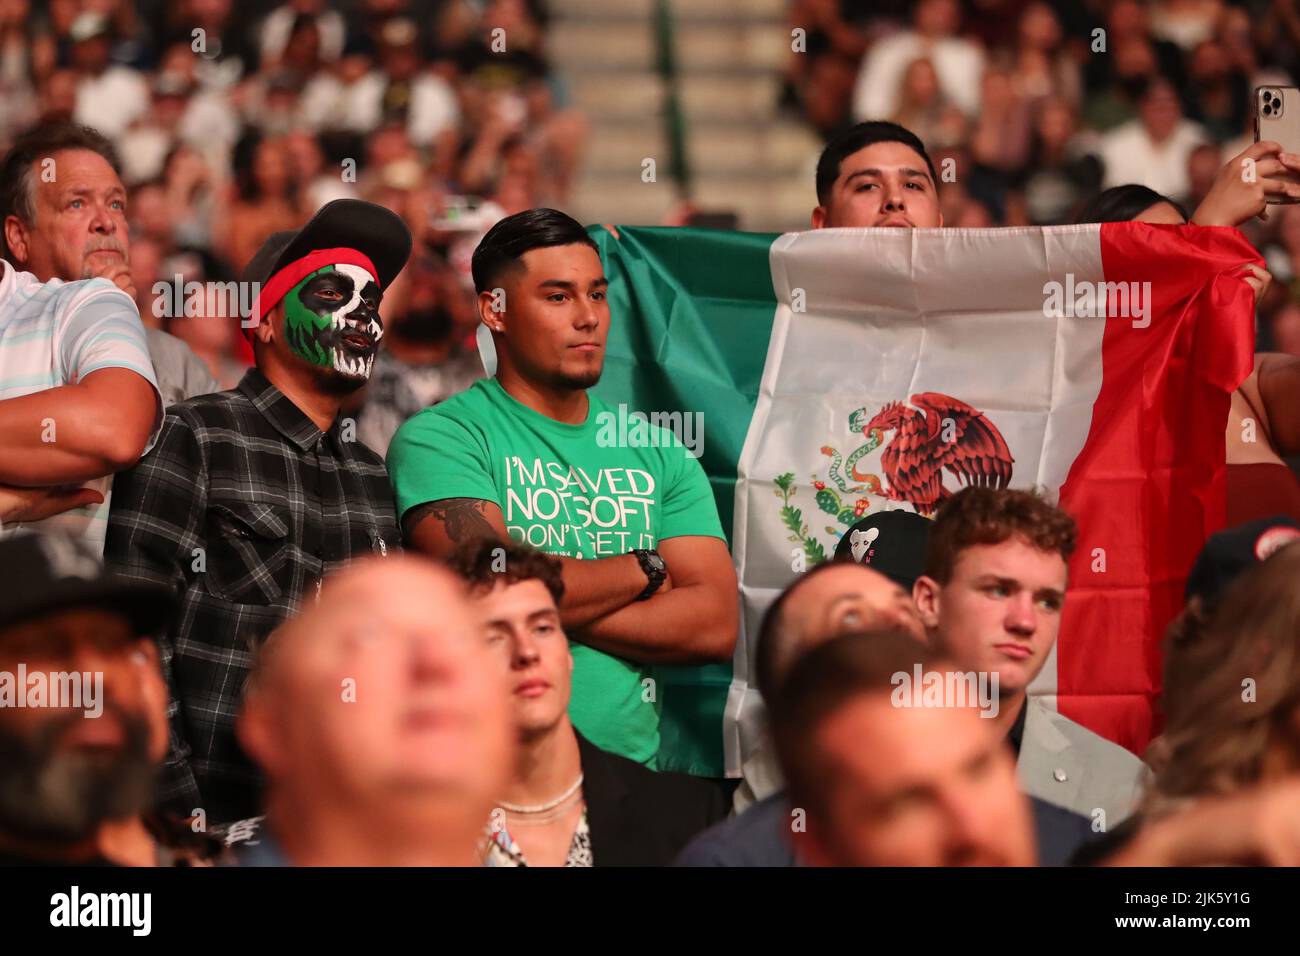 DALLAS, TX - JULY 30: (L-R) Mexican supports are seen before the fight between Brandon Moreno and Kai Kara-France in their Flyweight bout during the UFC 277 event at American Airlines Center on July 30, 2022, in Dallas, Texas, United States. (Photo by Alejandro Salazar/PxImages) Credit: Px Images/Alamy Live News Stock Photo